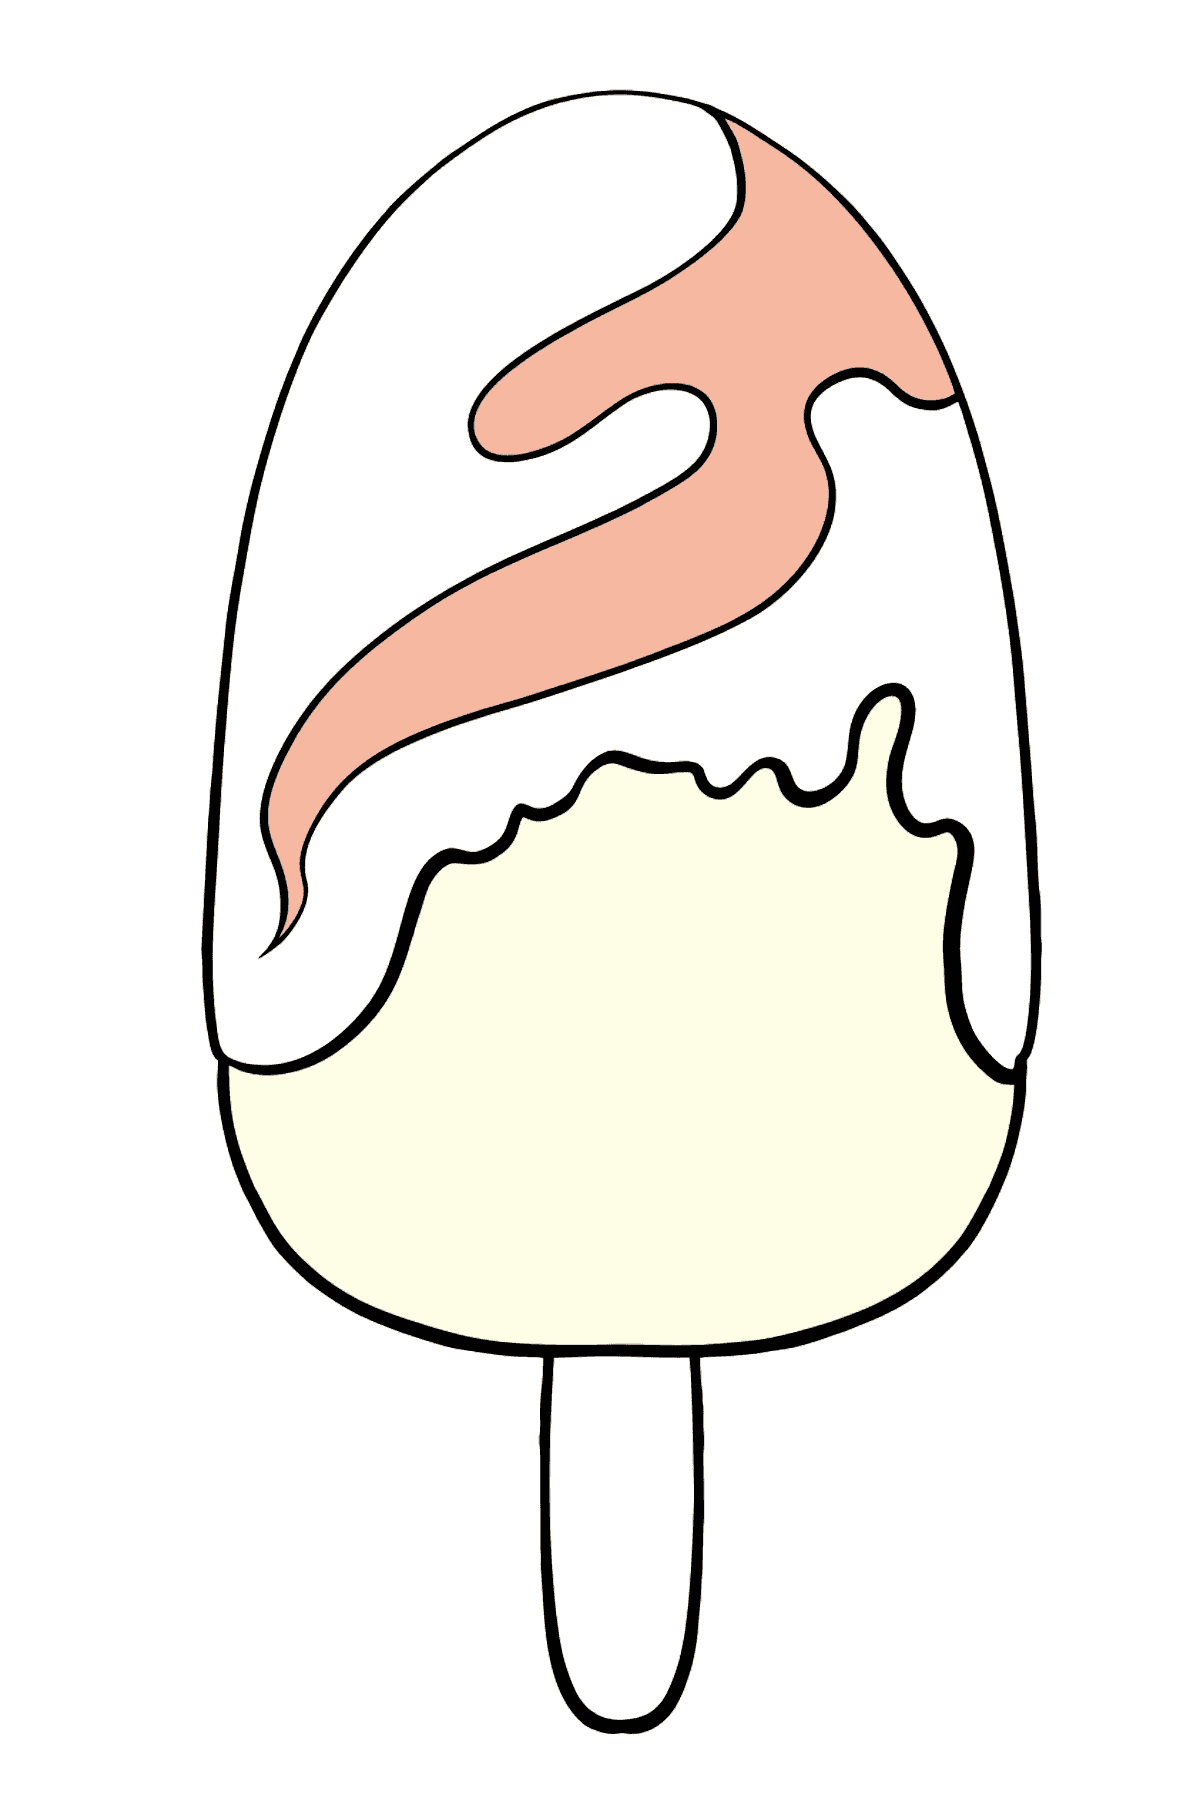 Popsicle with Chocolate and Syrup coloring page - Coloring Pages for Kids